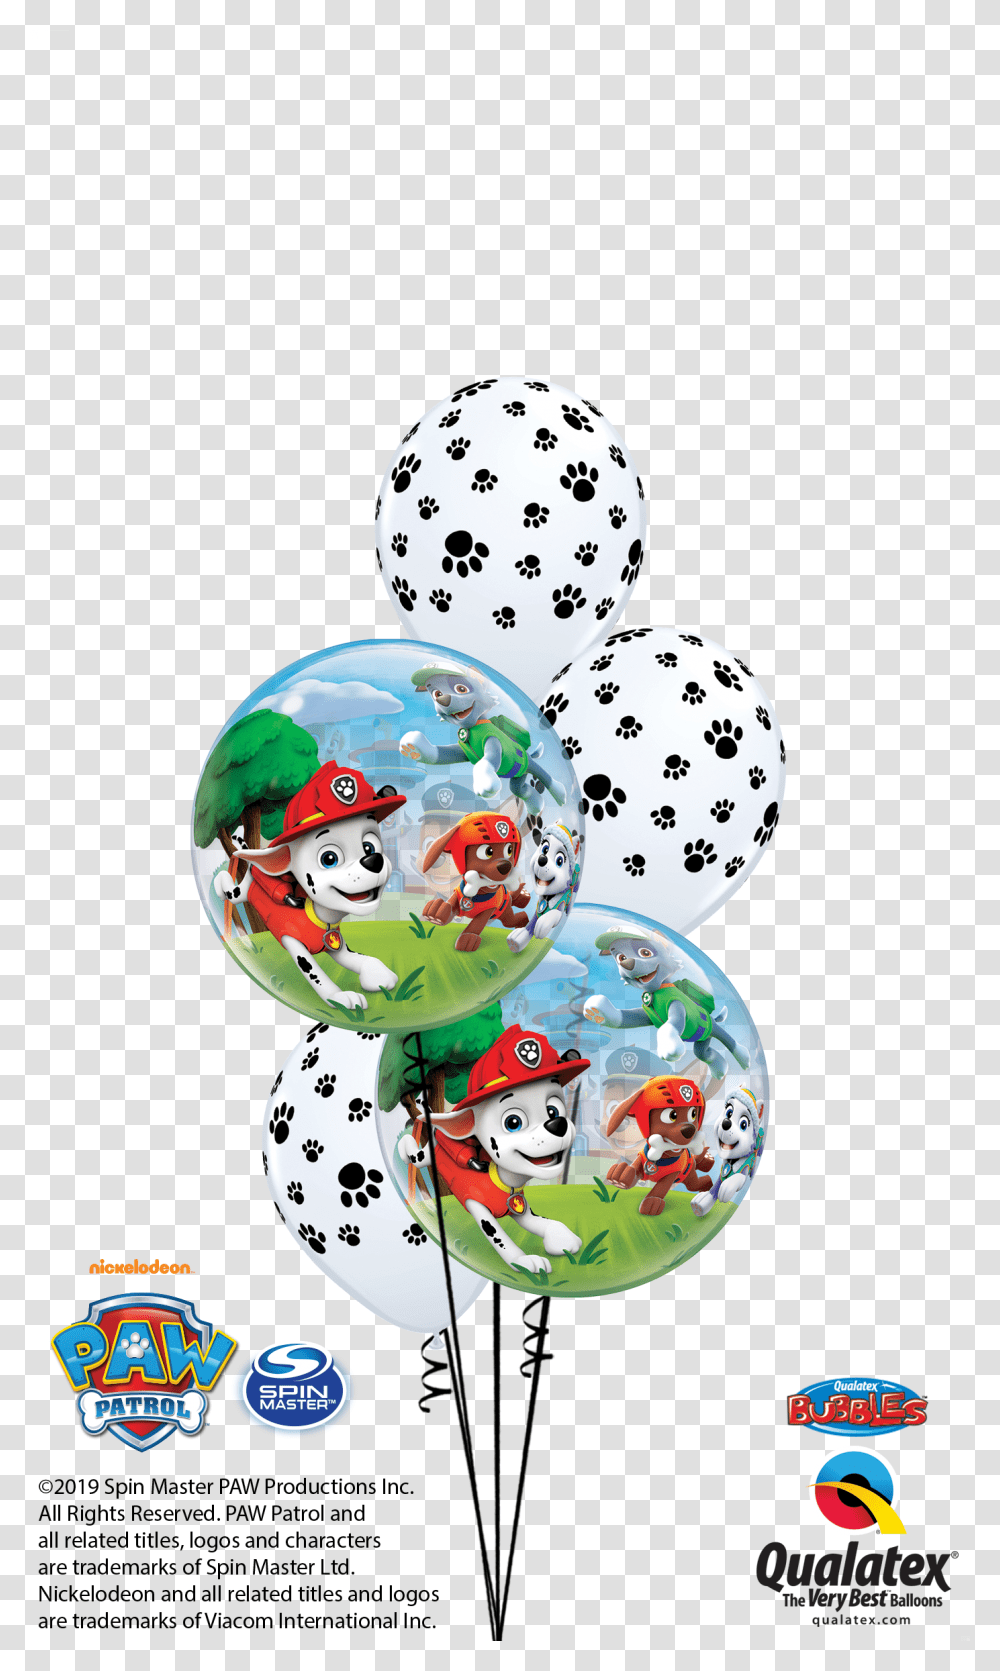 2018 Viacom International Inc All Rights Reserved Balloon, Sphere, Poster Transparent Png